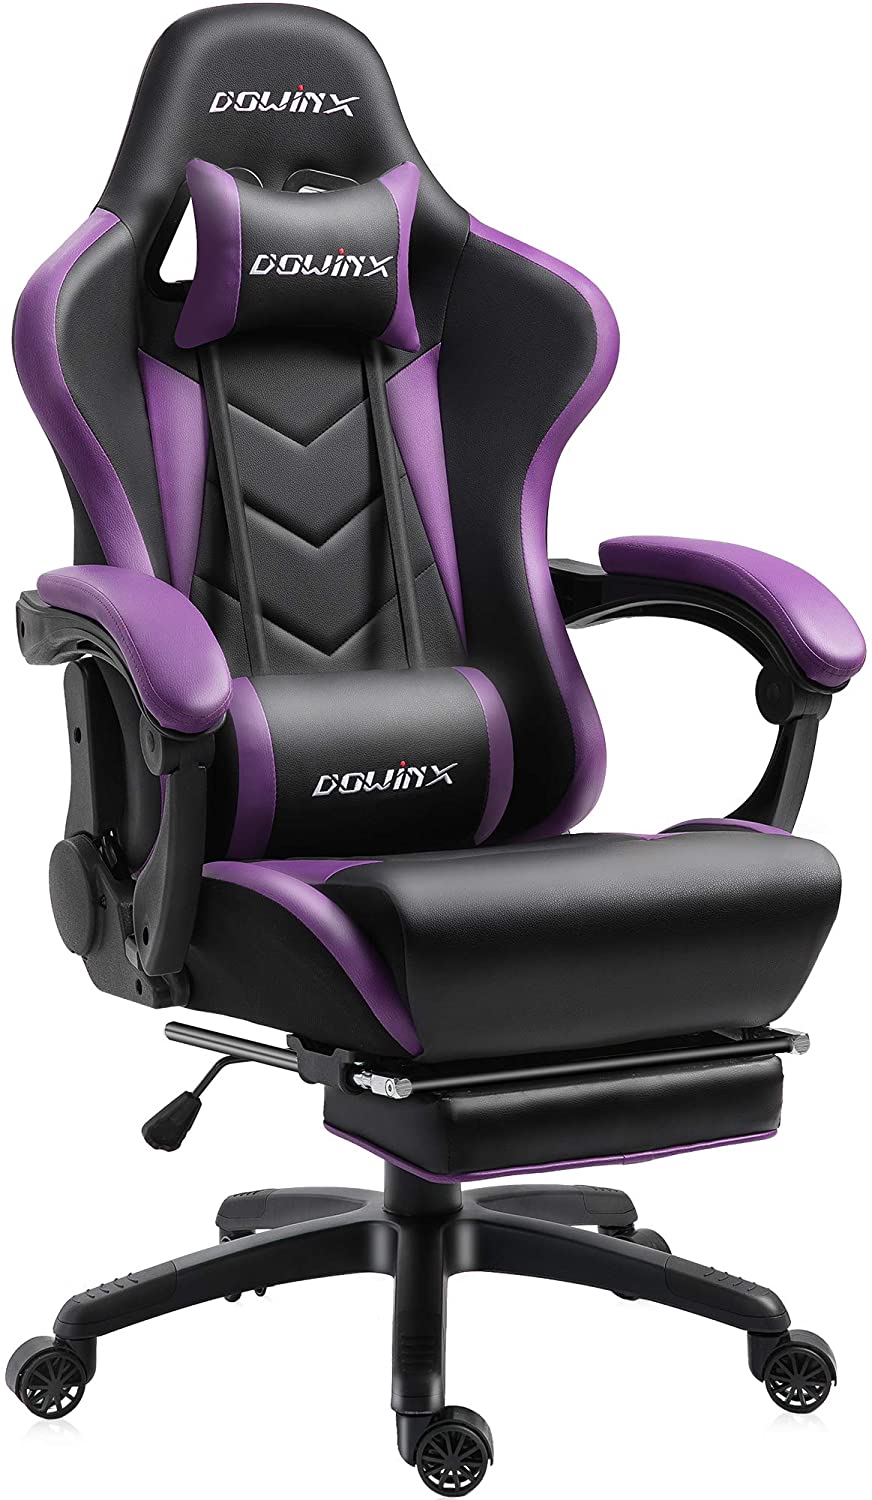 Dowinx Chaise Gaming, Coussin Plat Large Fauteuil Gamer avec